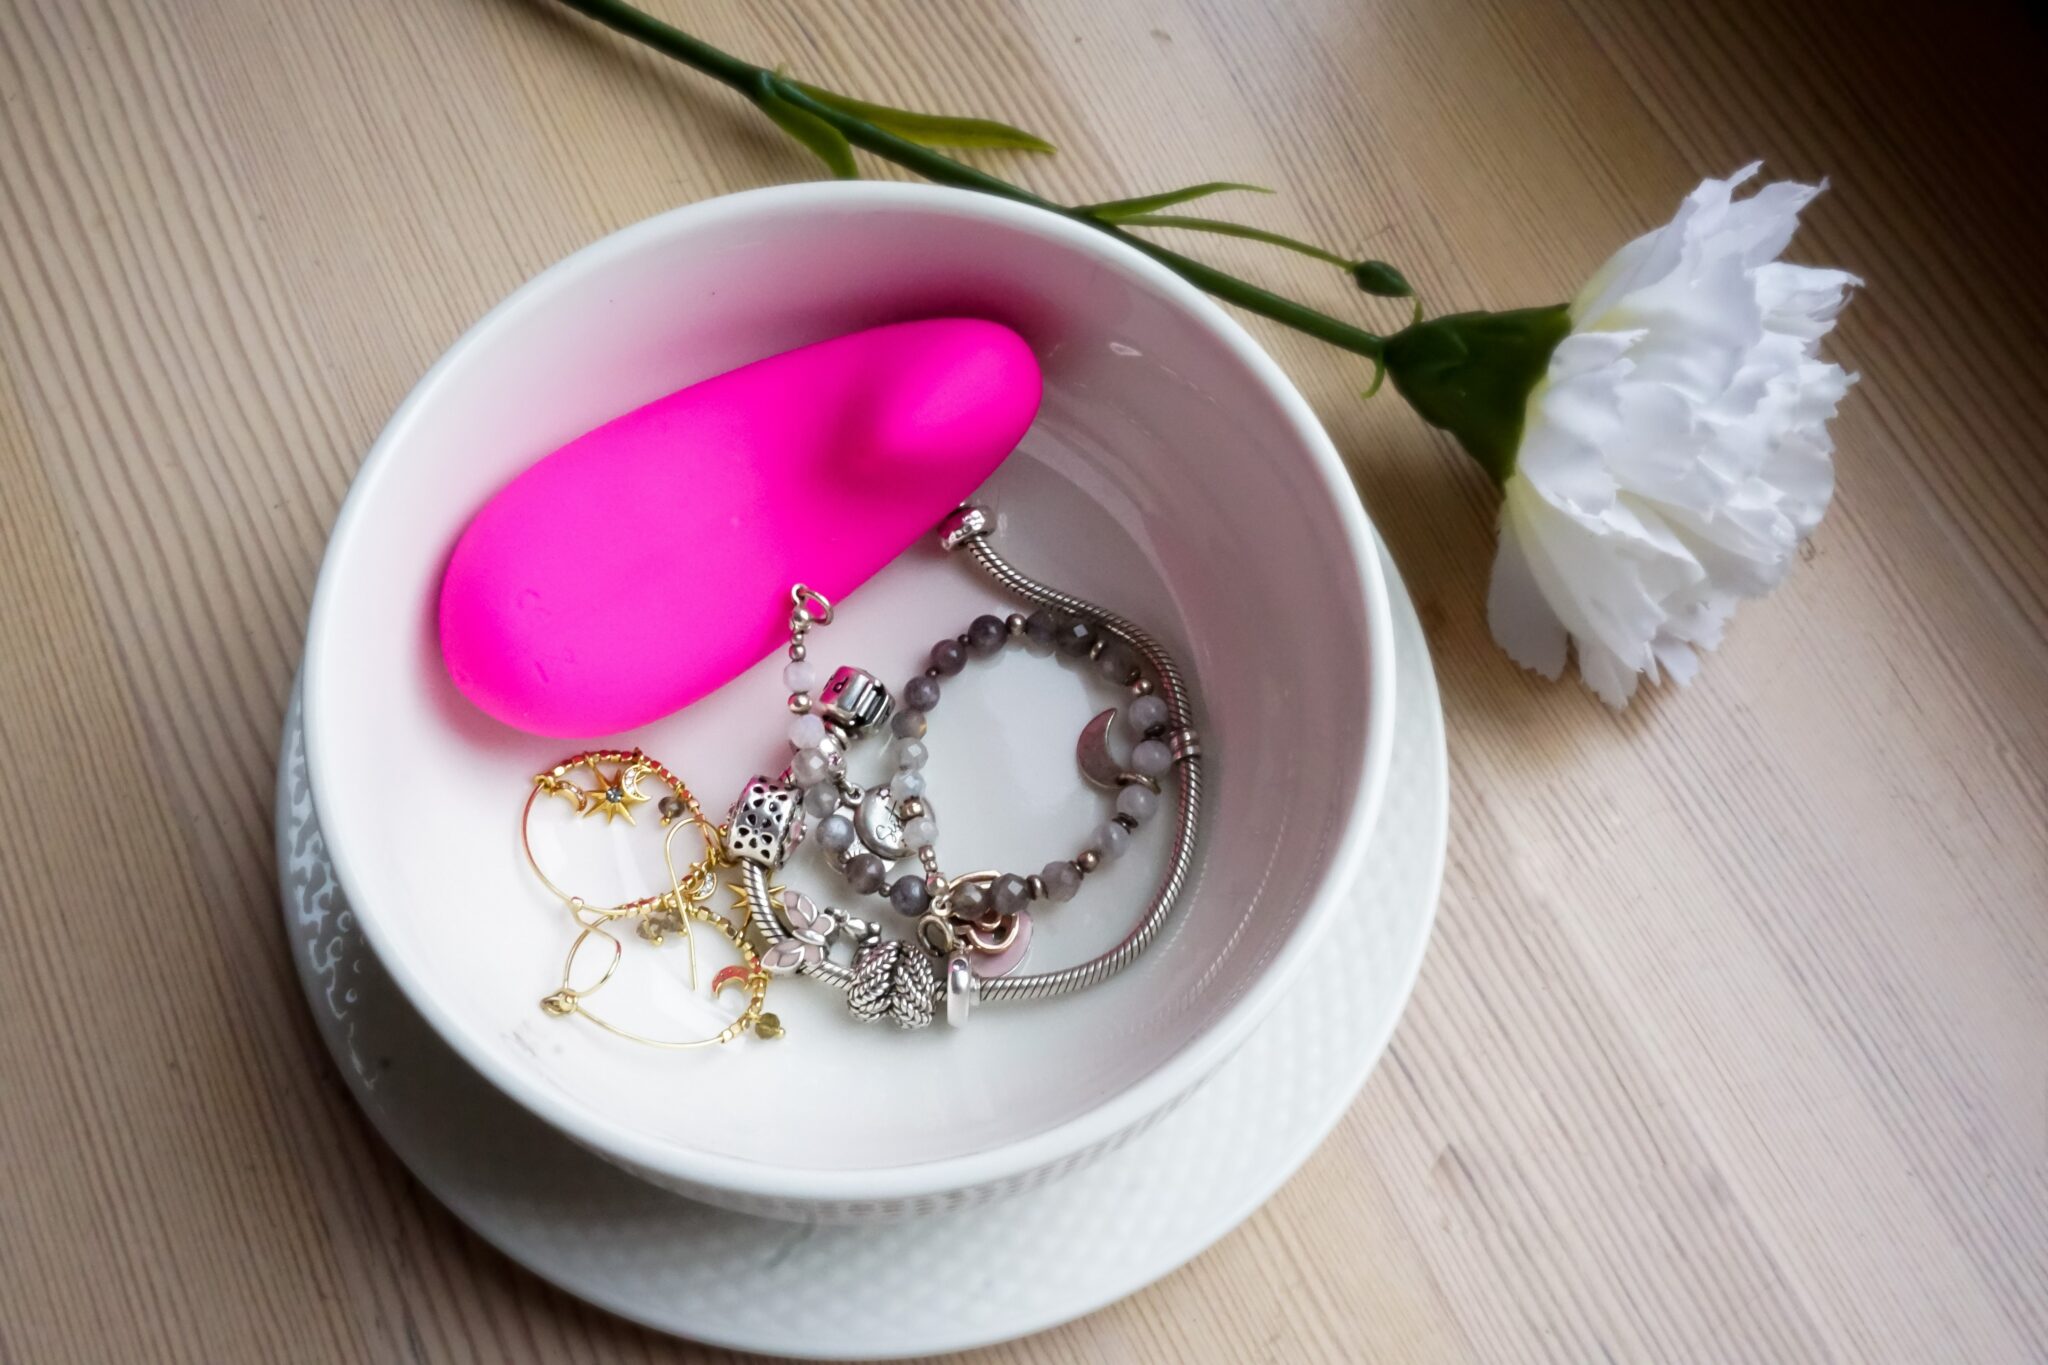 A pink vibrator in a bowl of jewelry